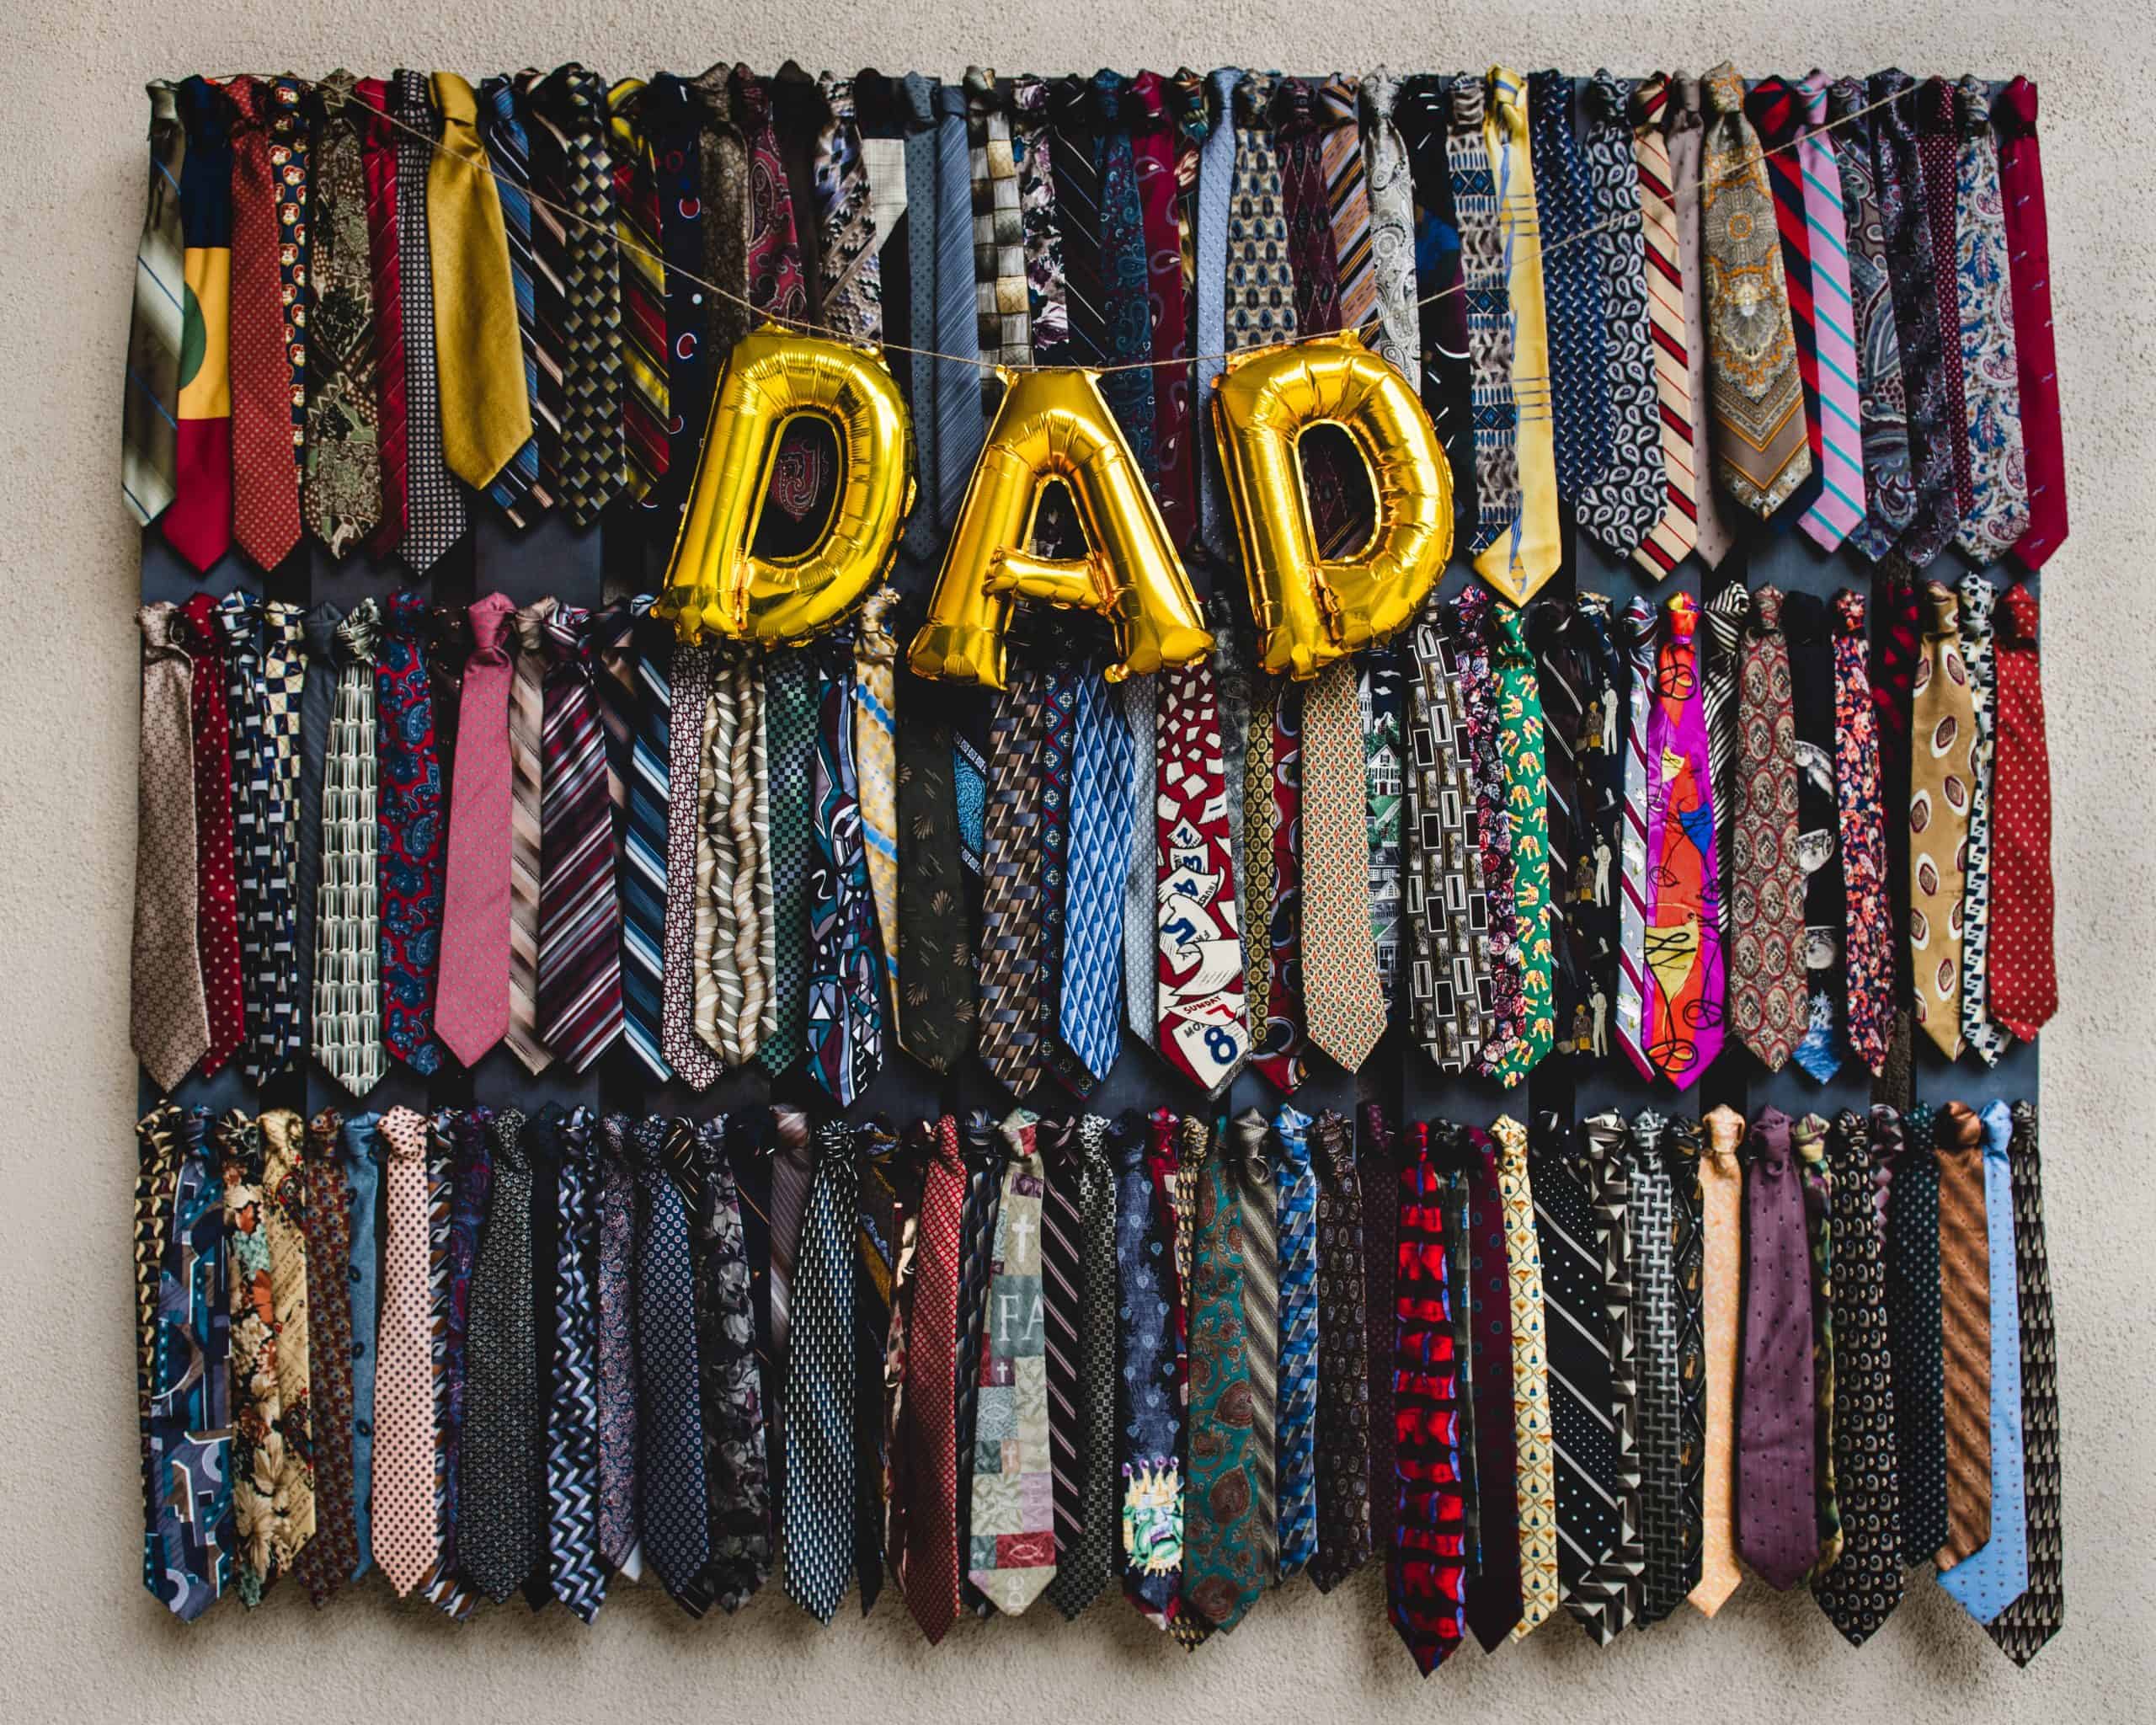 Fathers’ Day: 100 years of history and why it still matters